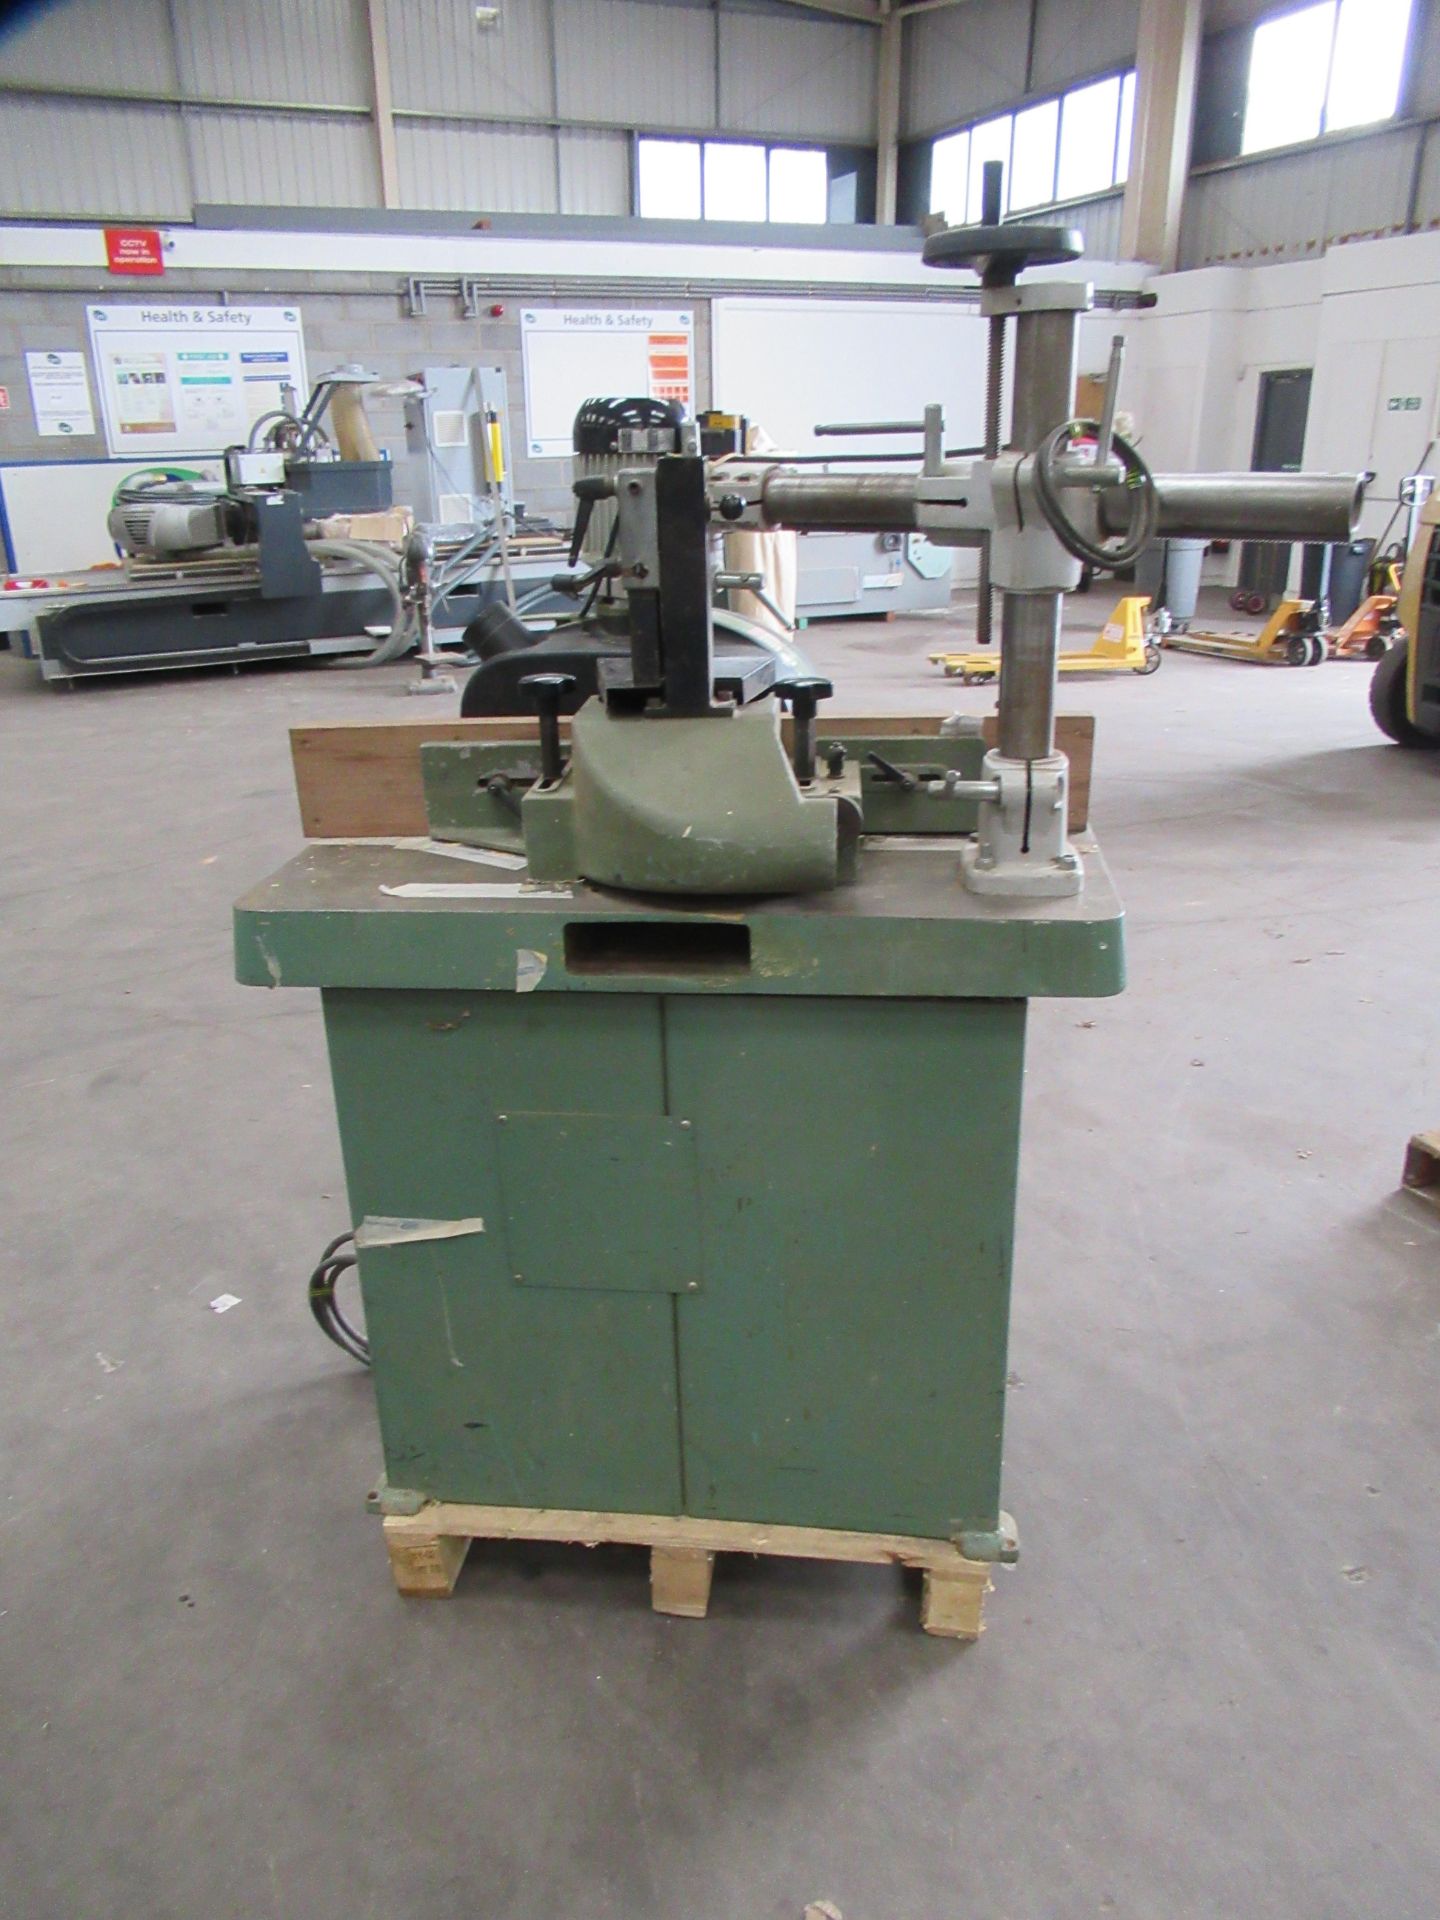 1 1/4" Spindle Moulder 4 Speed 4kW 415V with Powerd Roller Feed - Image 6 of 9